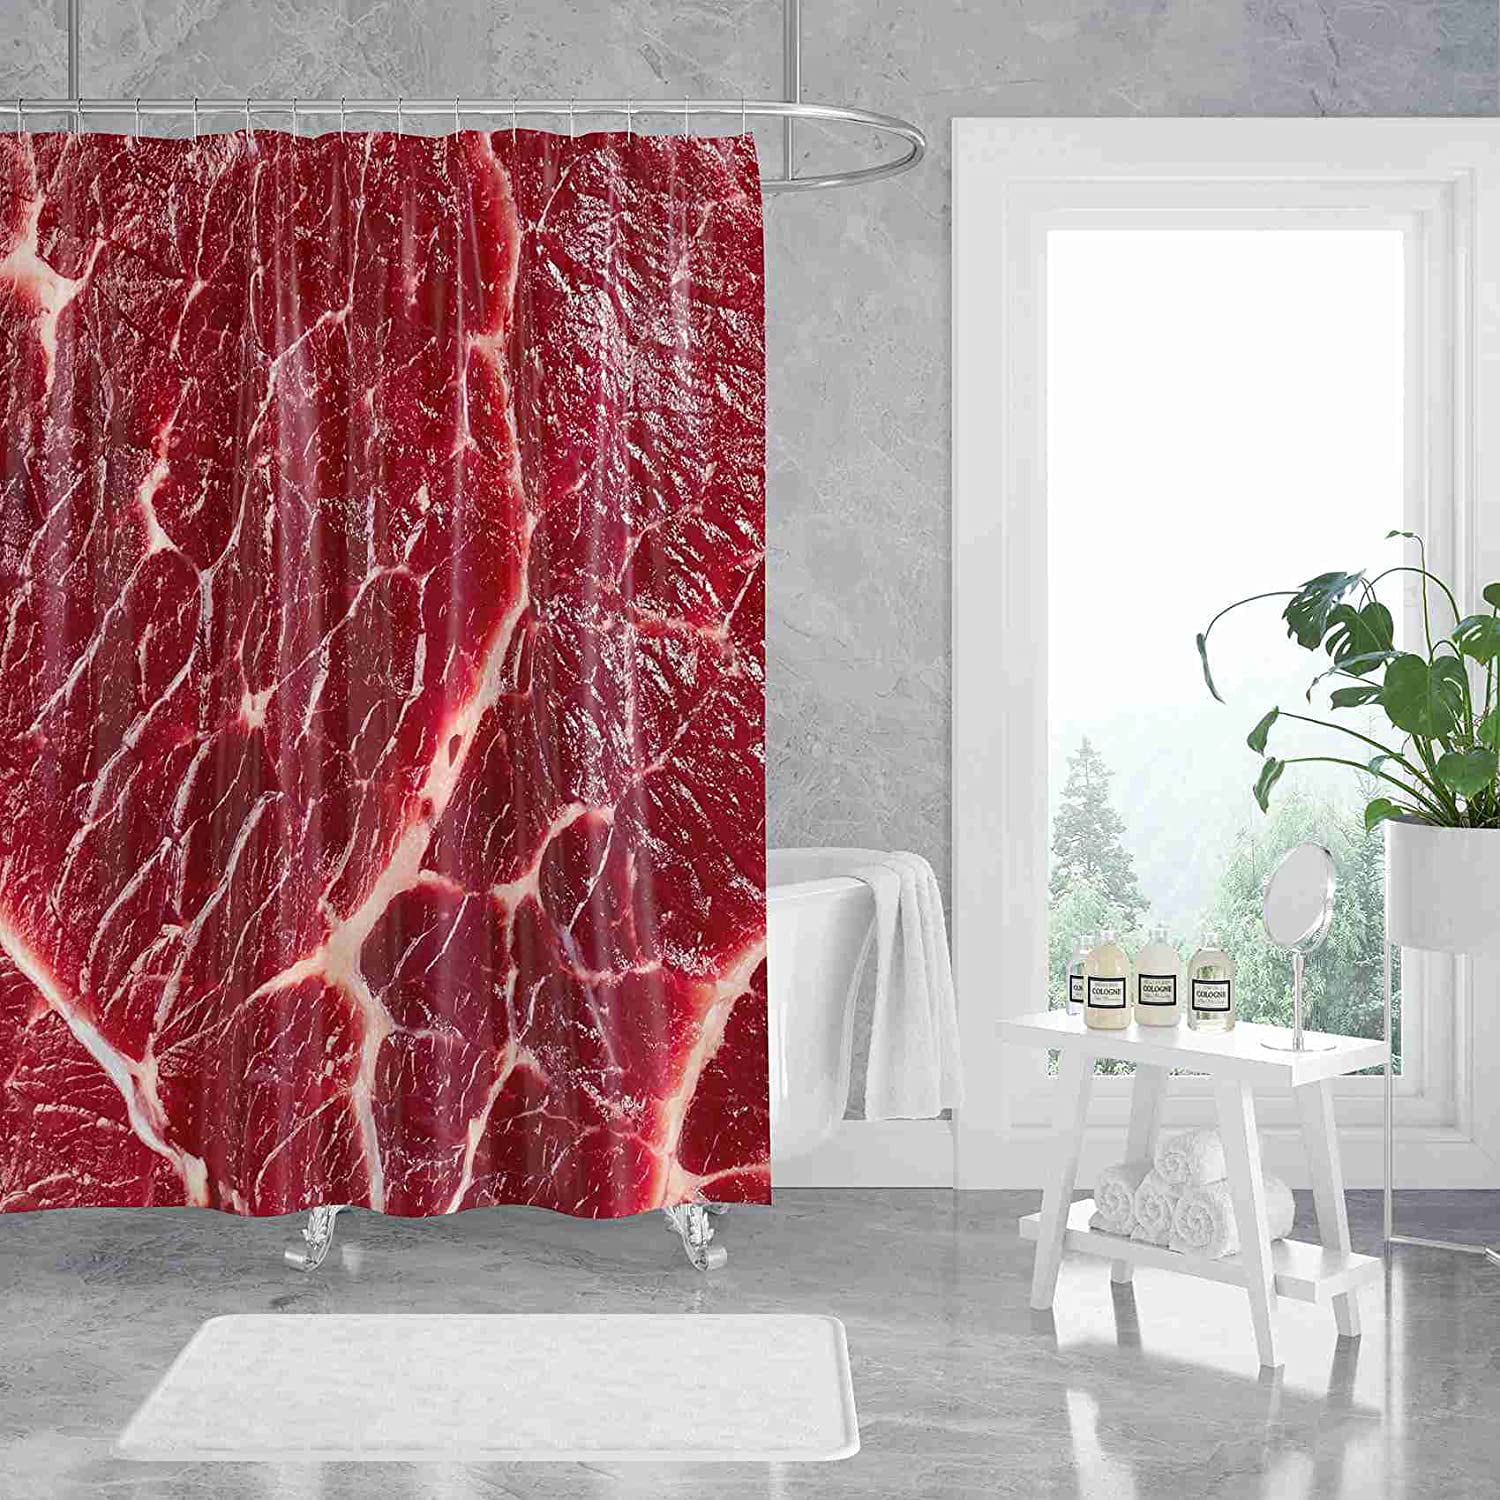 Emvency Fabric Shower Curtain Curtains With Hooks Red Beef Of Meat Raw Food Meal Steak 60 X72 Waterproof Decorative Bathroom Com